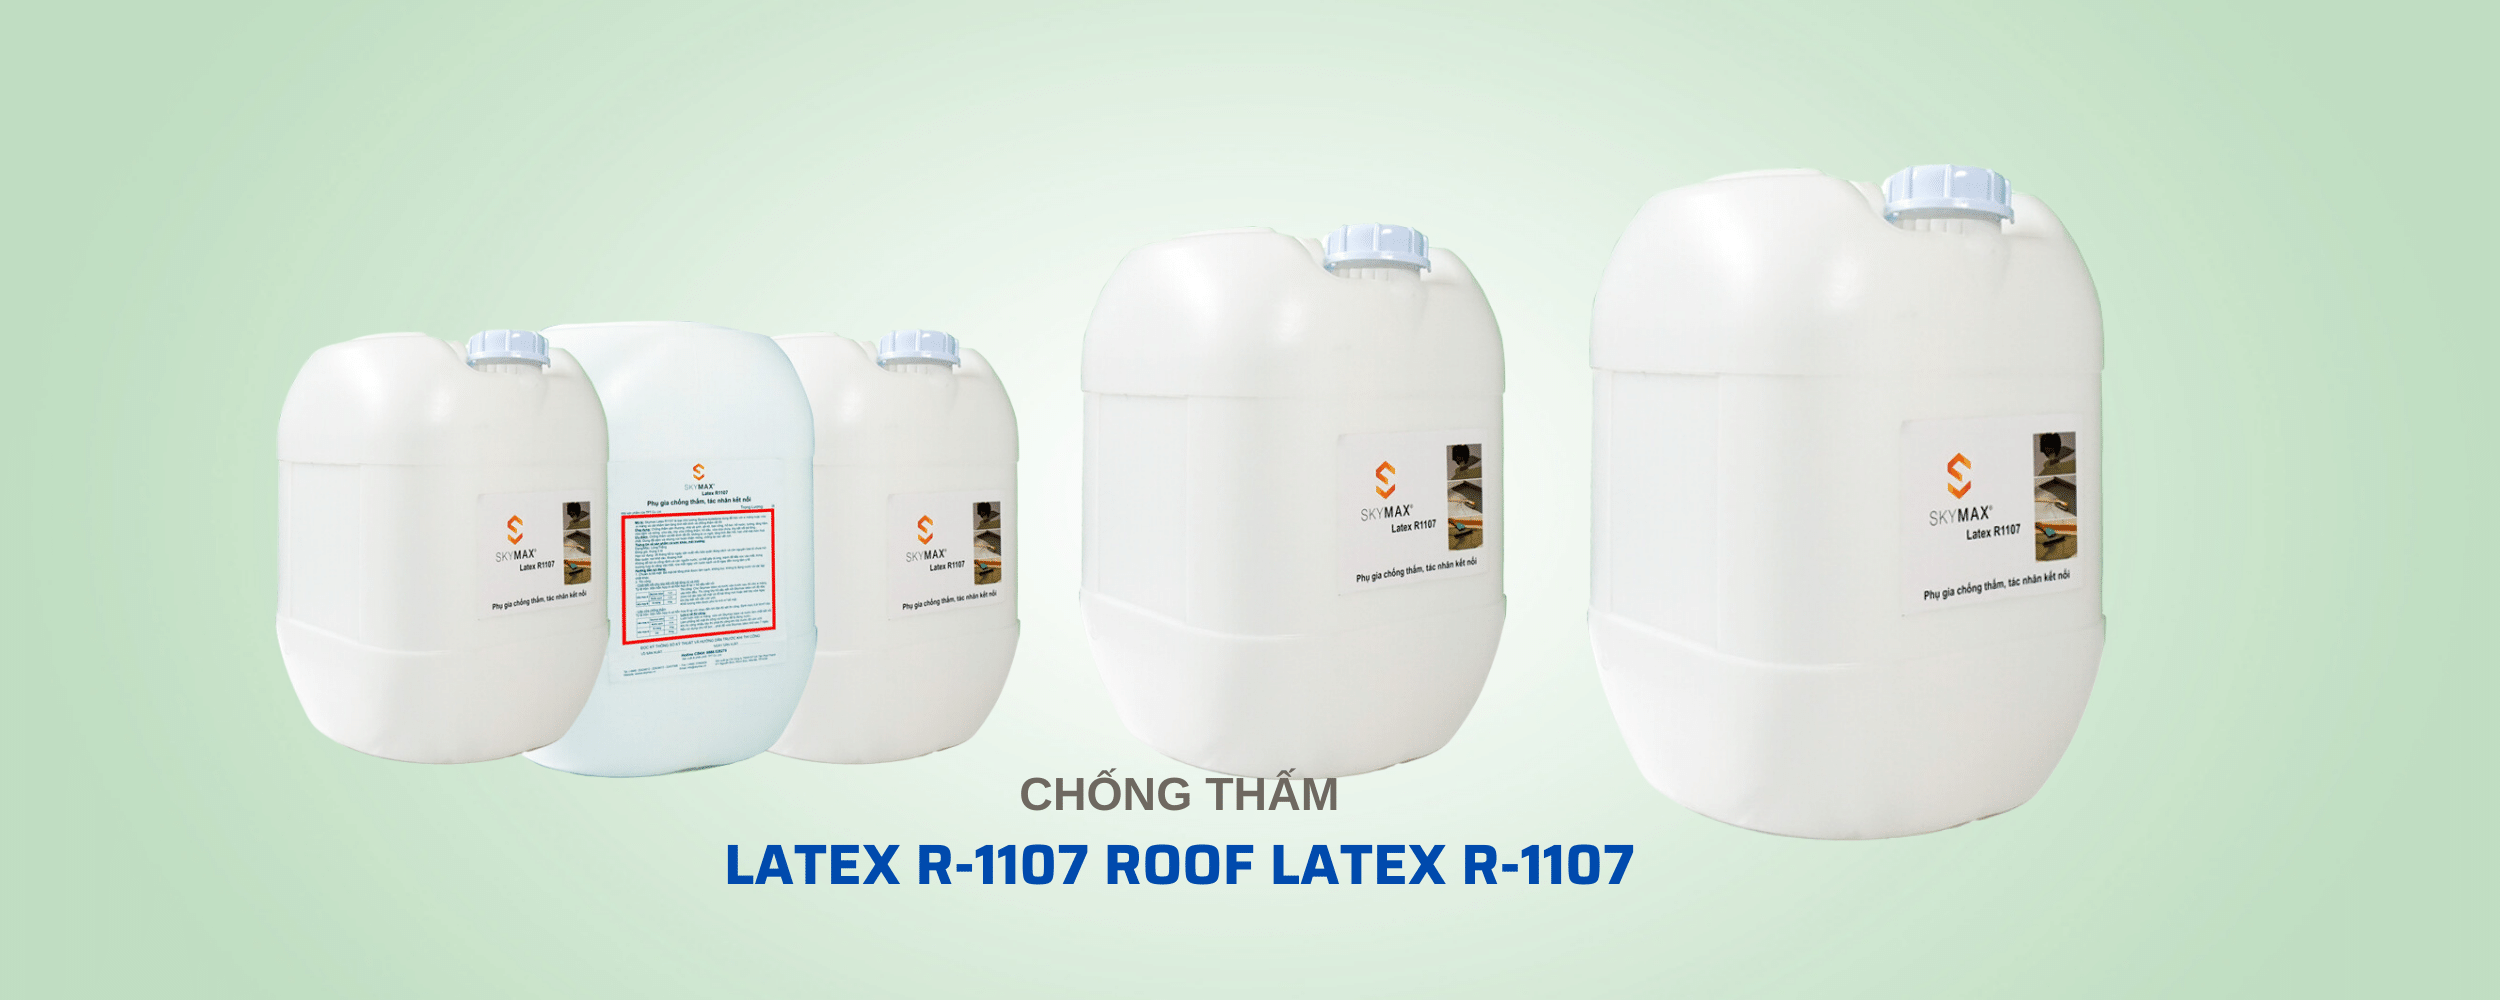 CHỐNG THẤM LATEX R-1107 ROOF LATEX R-1107-3747-1